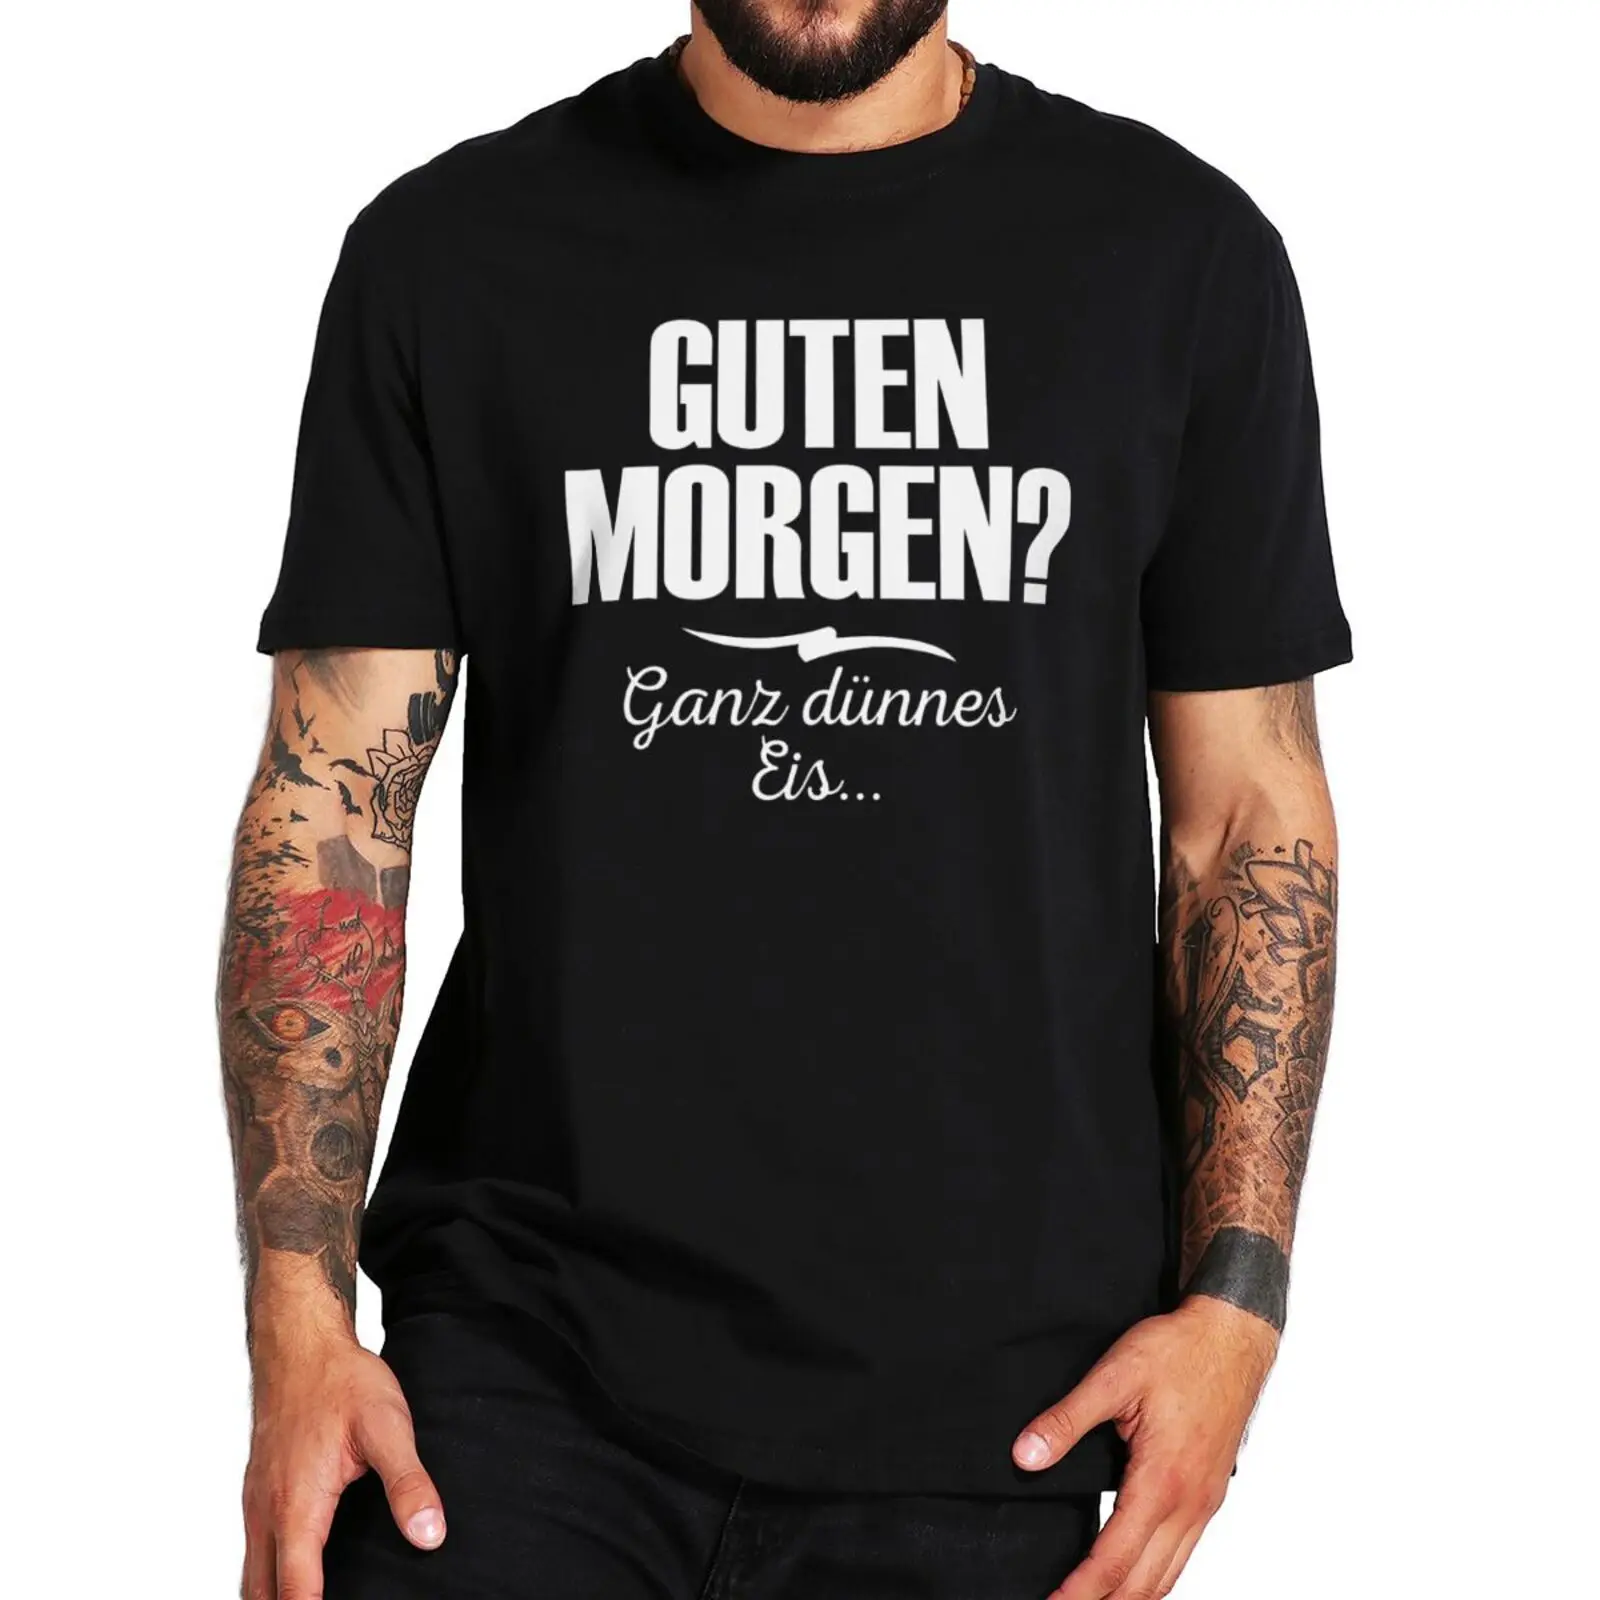 

Good Morning Quite Thin Ice T Shirt Funny German Saying Summer Novelty Tshirt With Text Guten Morgen Ganz Thin Eis Tee Top